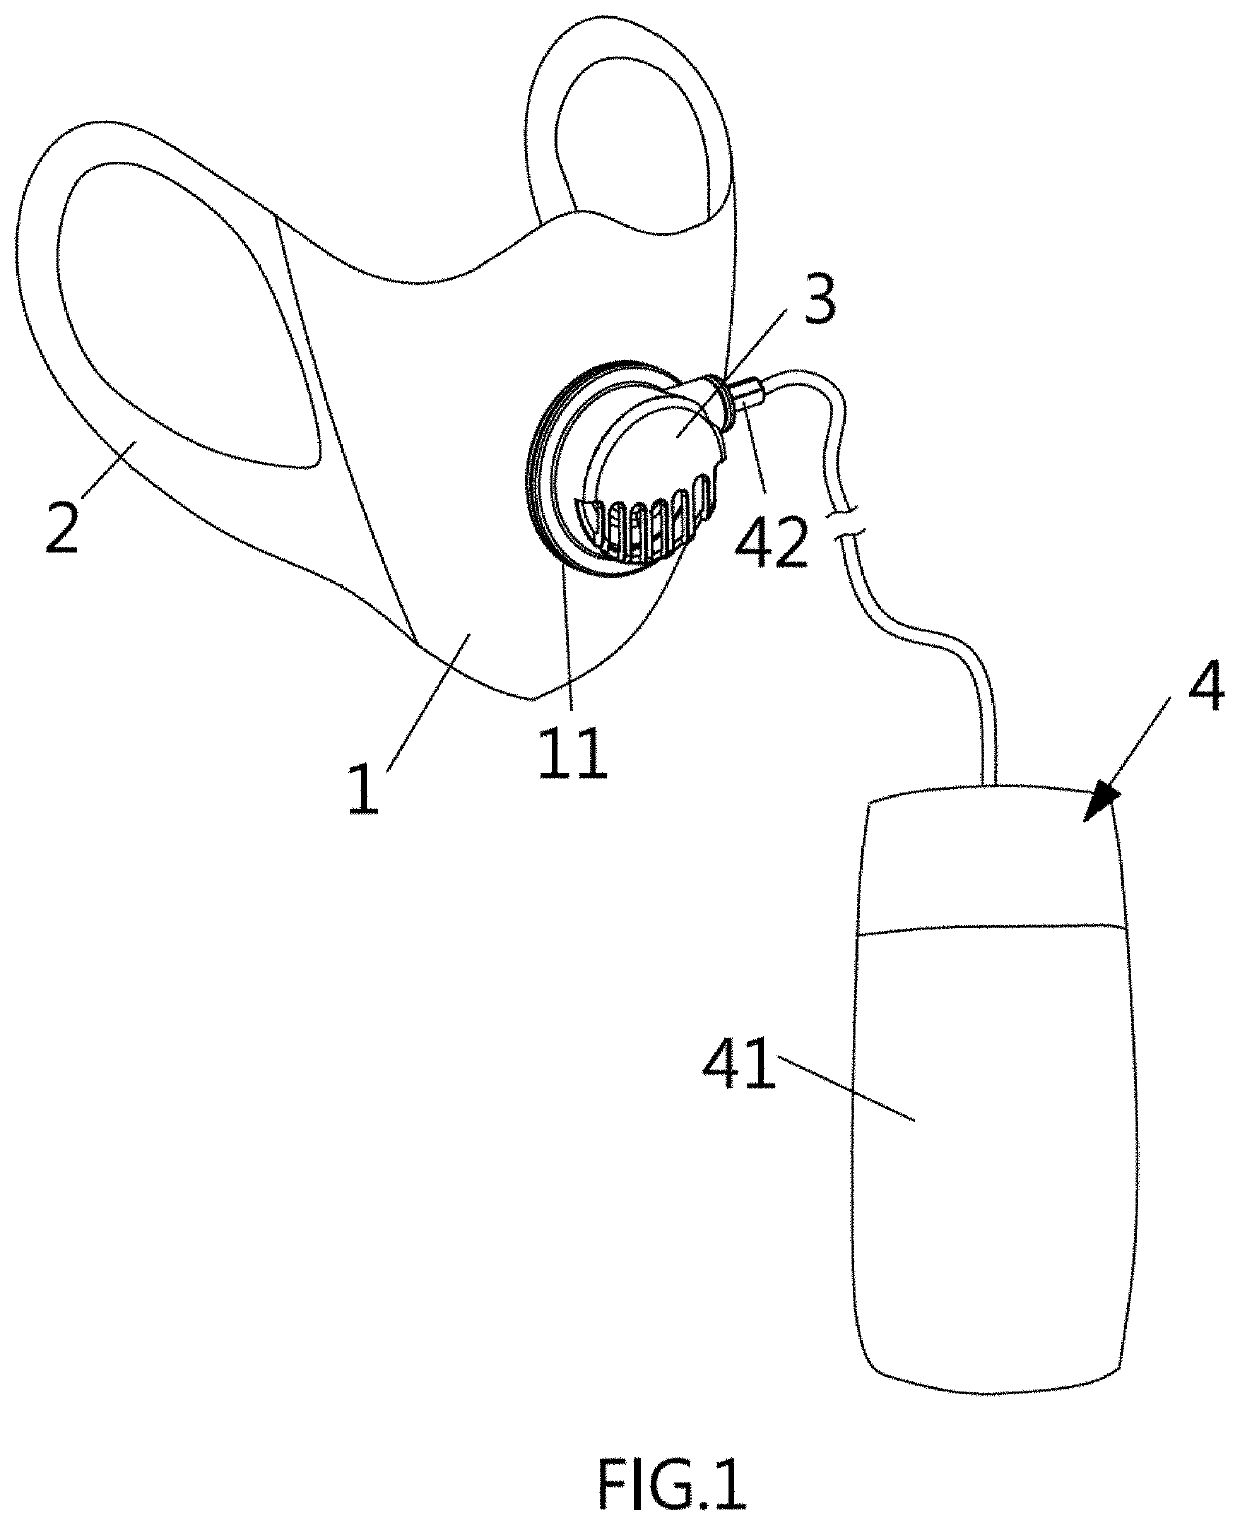 Filter-type respiratory protective device